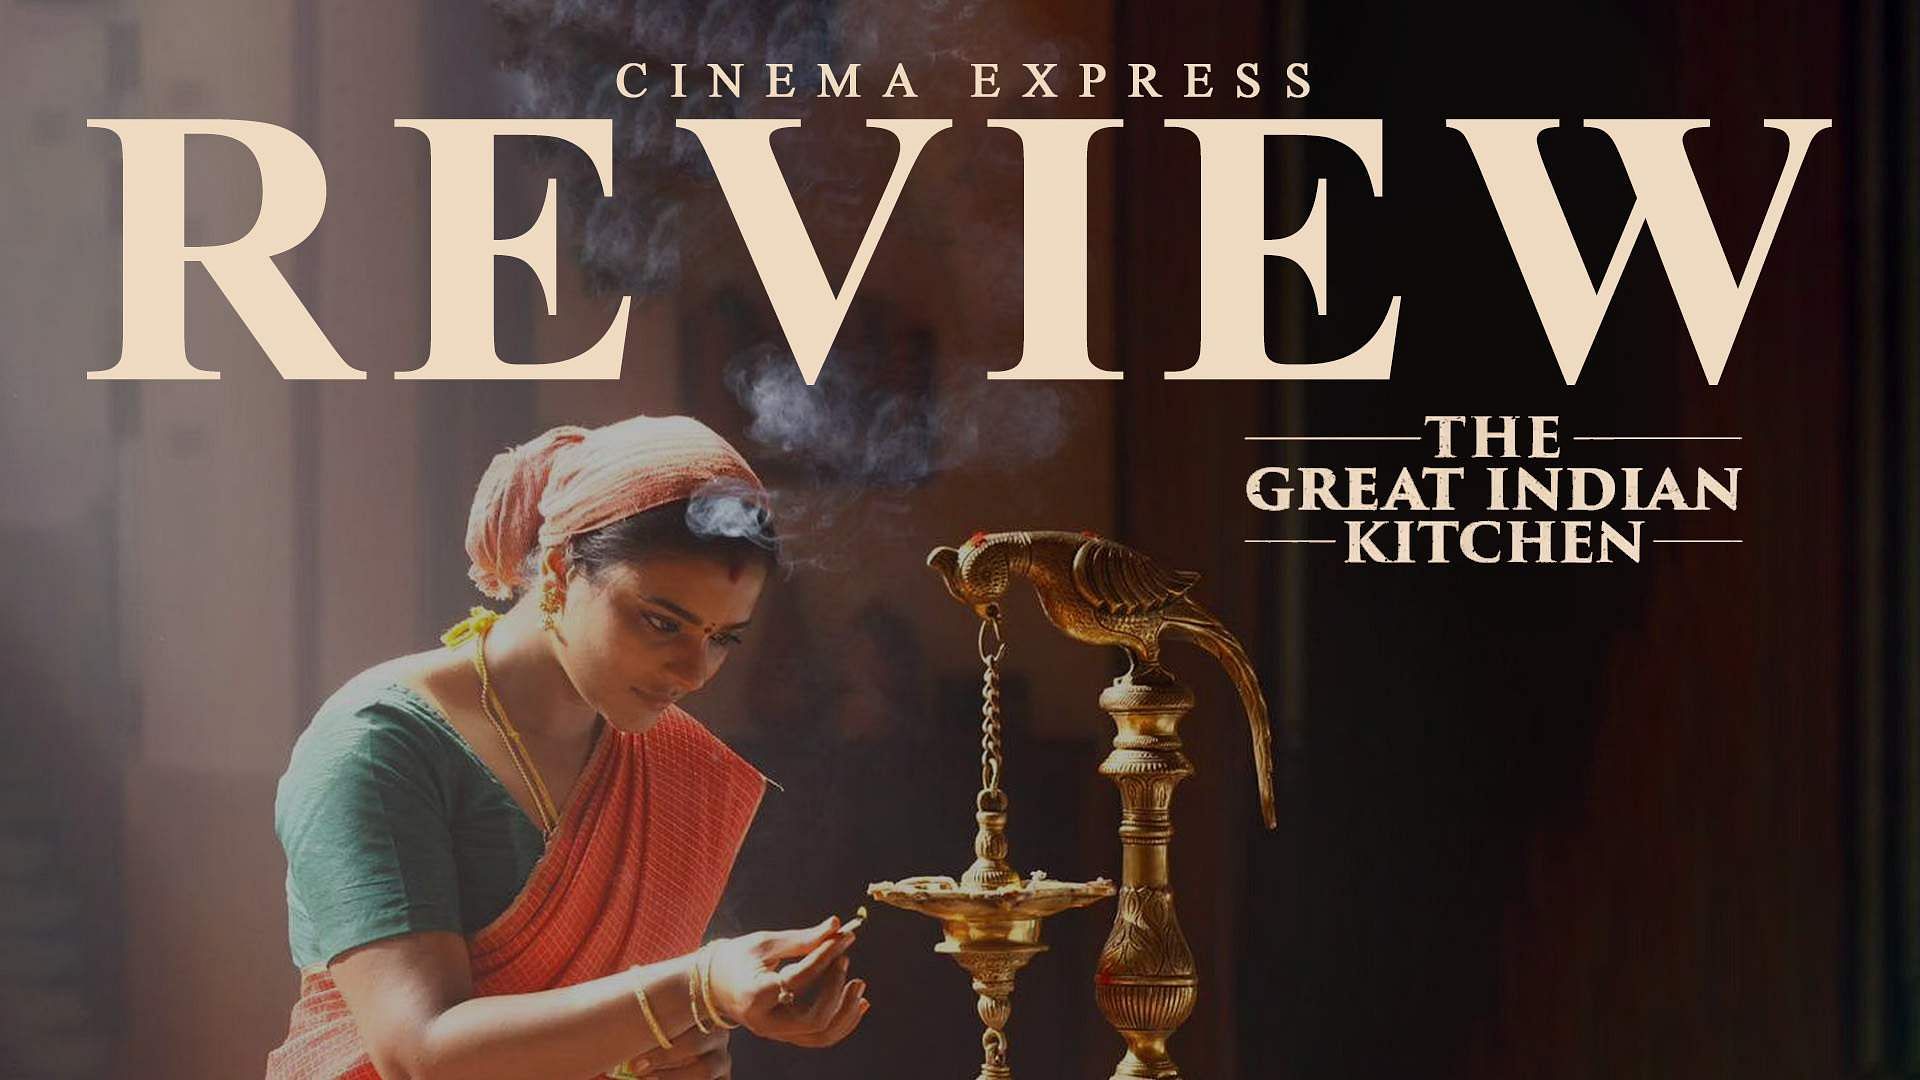 The Great Indian Kitchen Movie Review: A well-intended, yet functional remake